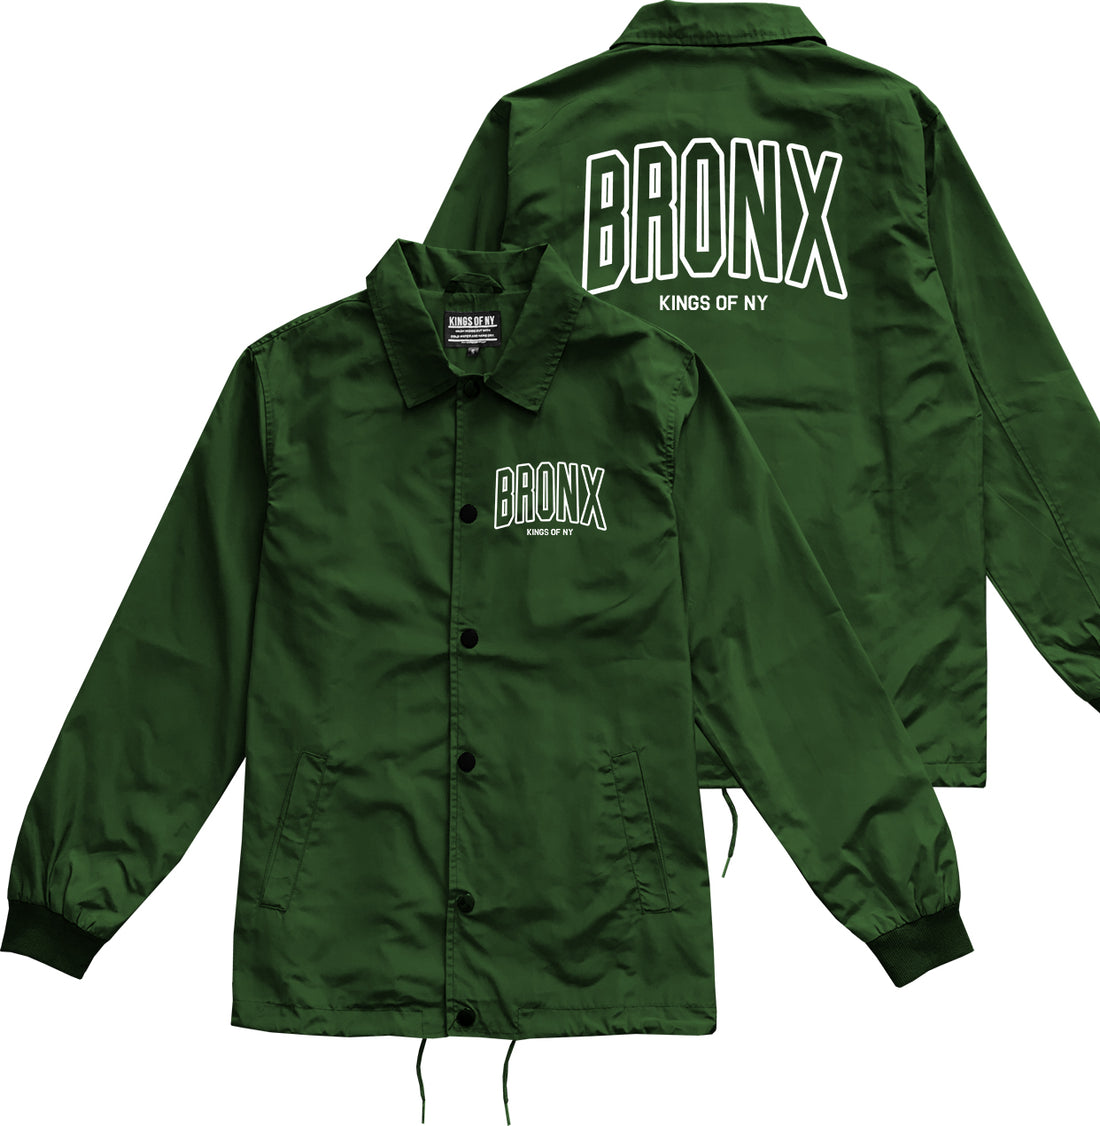 BRONX College Outline Mens Coaches Jacket Green by Kings Of NY